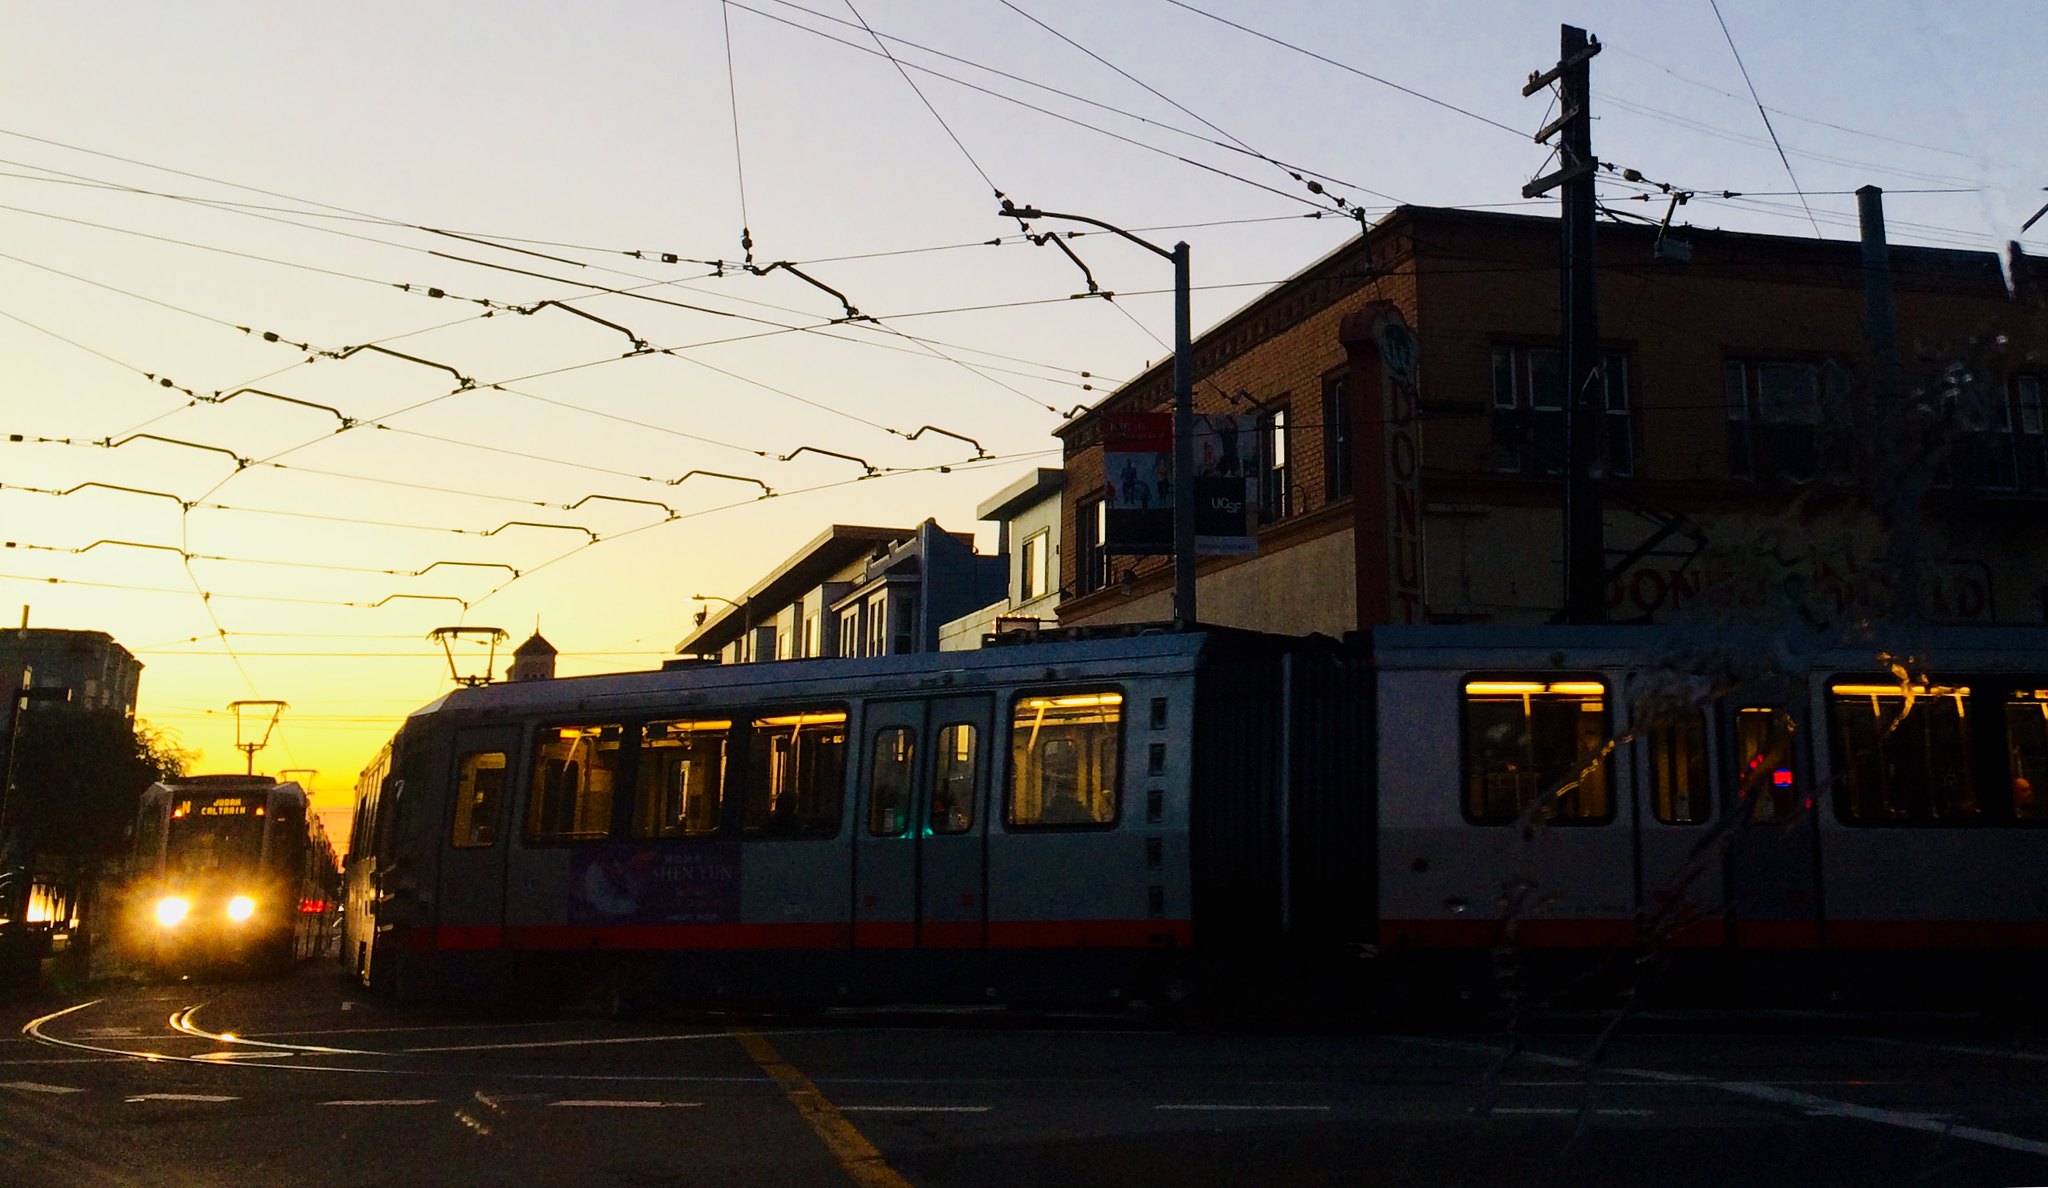 An image of the N Judah trains rounding the corner of 9th and Judah at twilight.